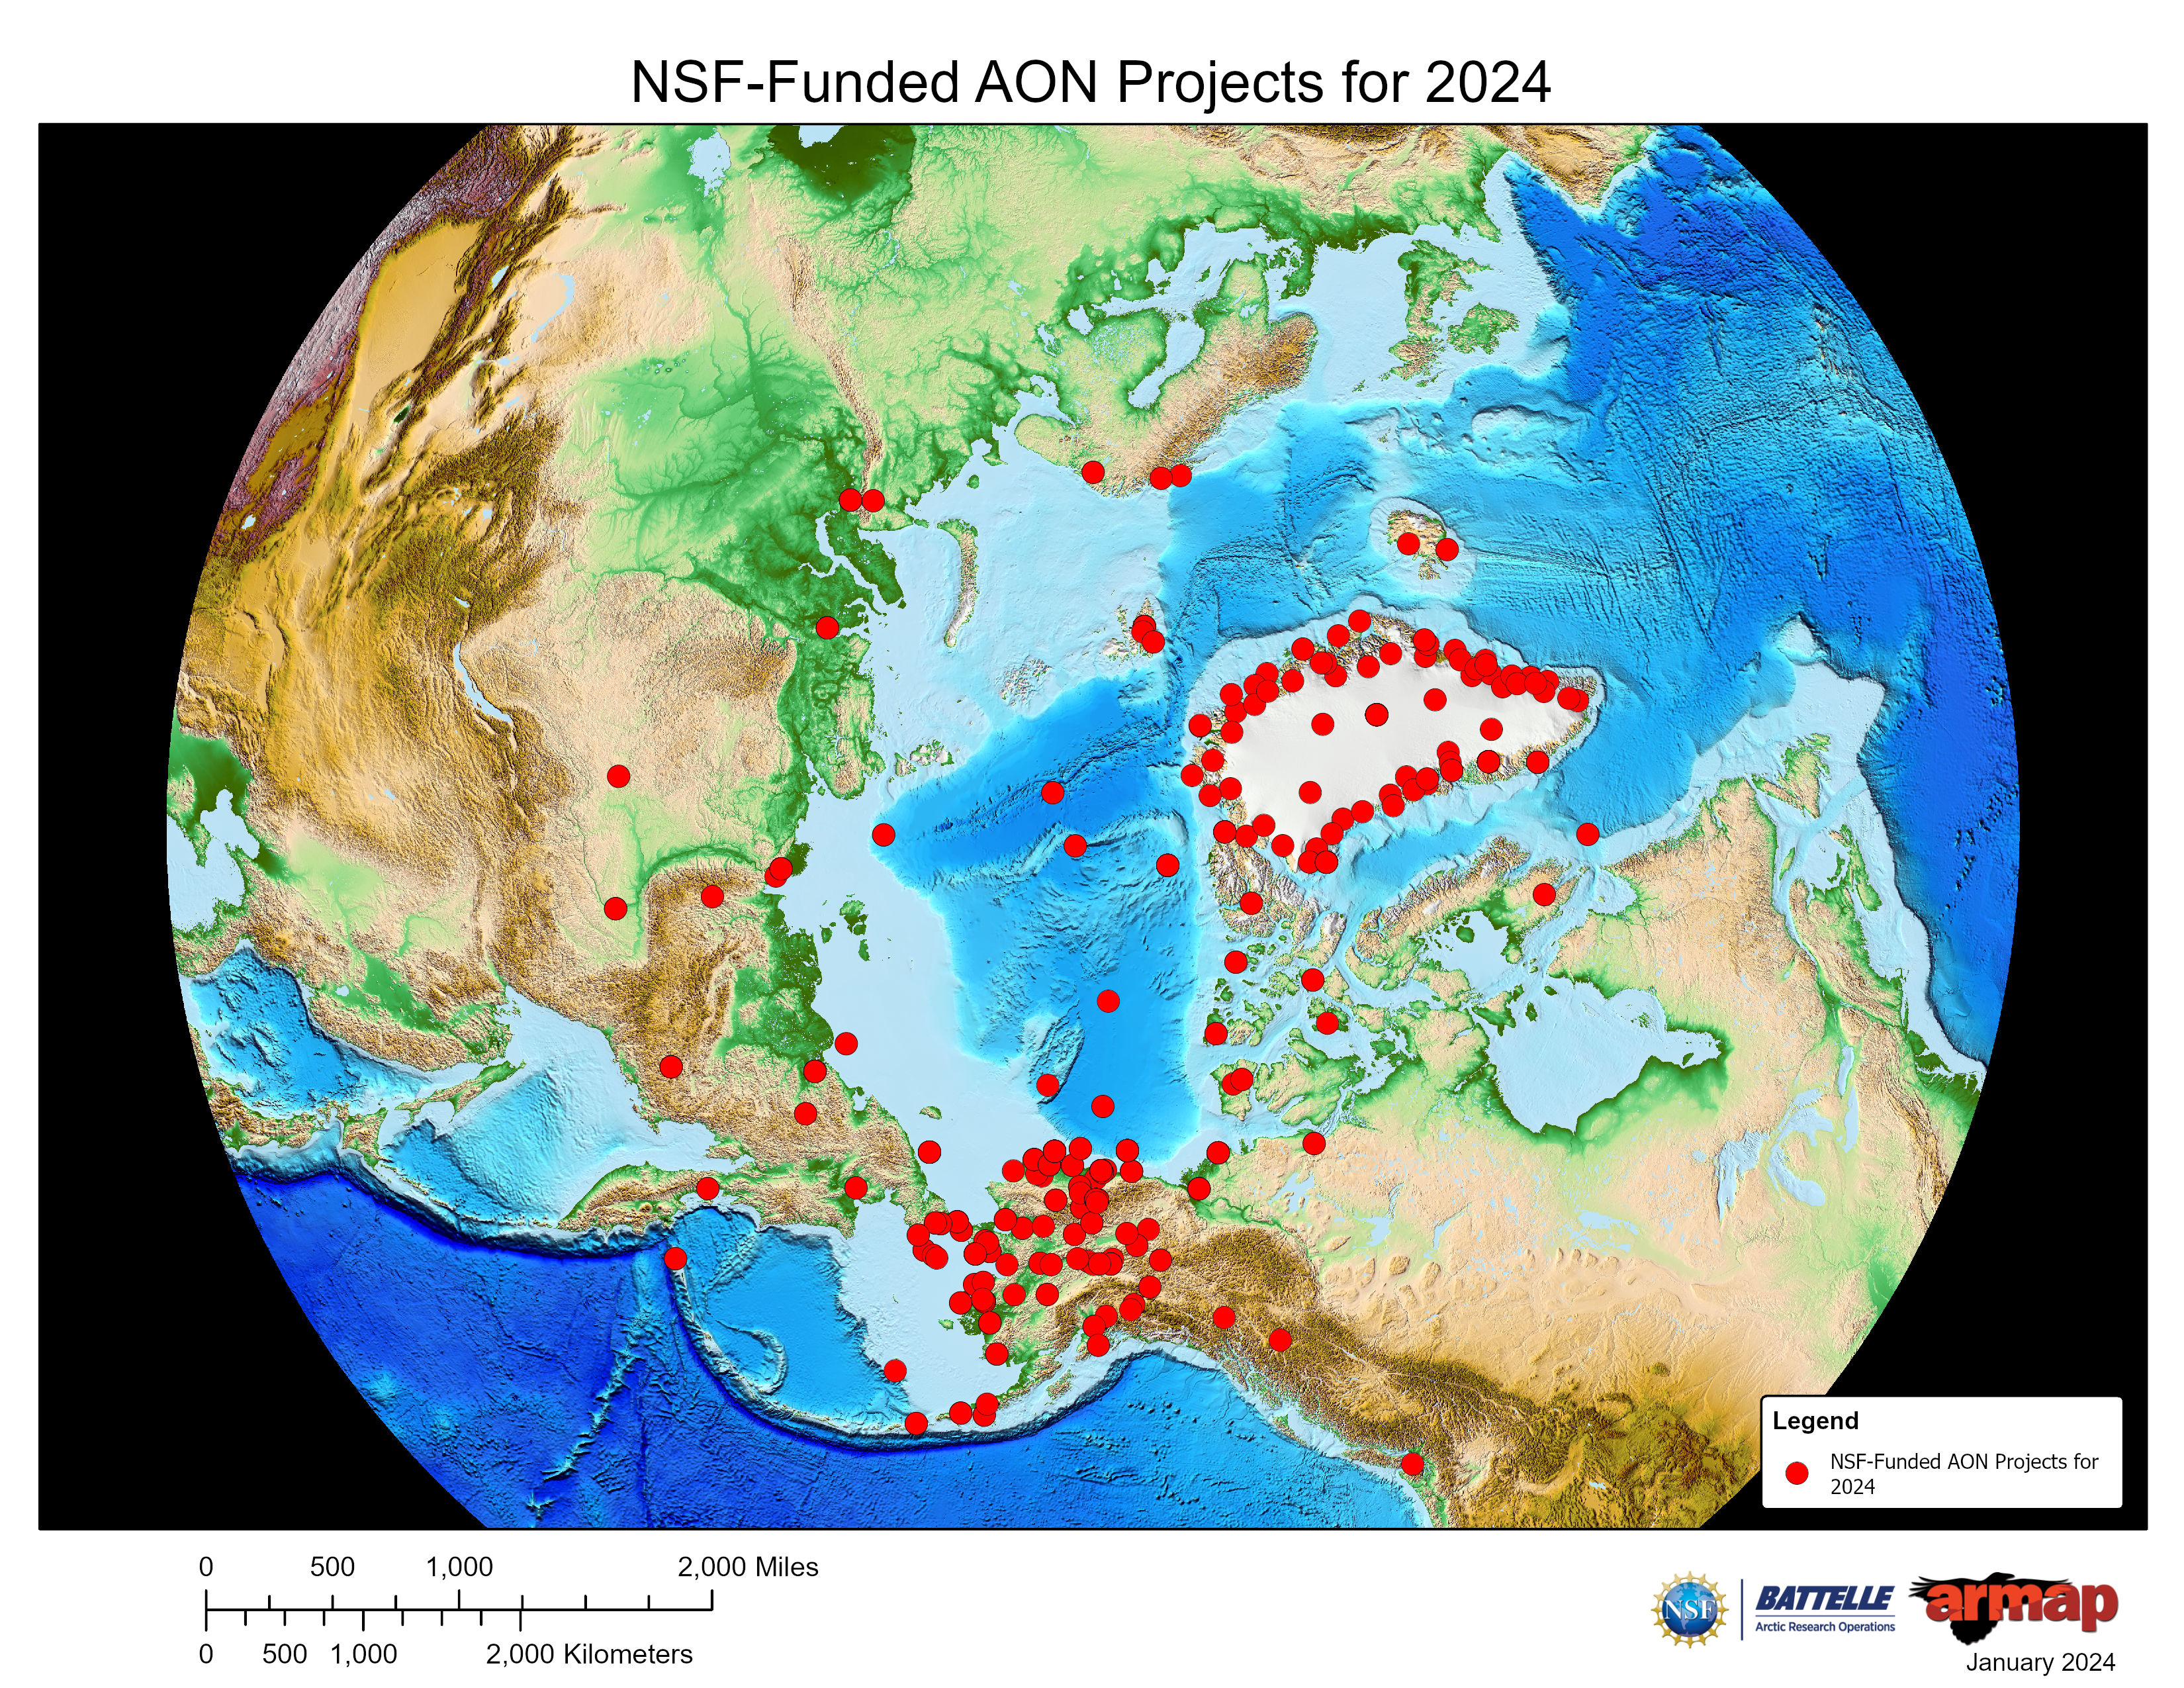 NSF-Funded AON Projects this Year